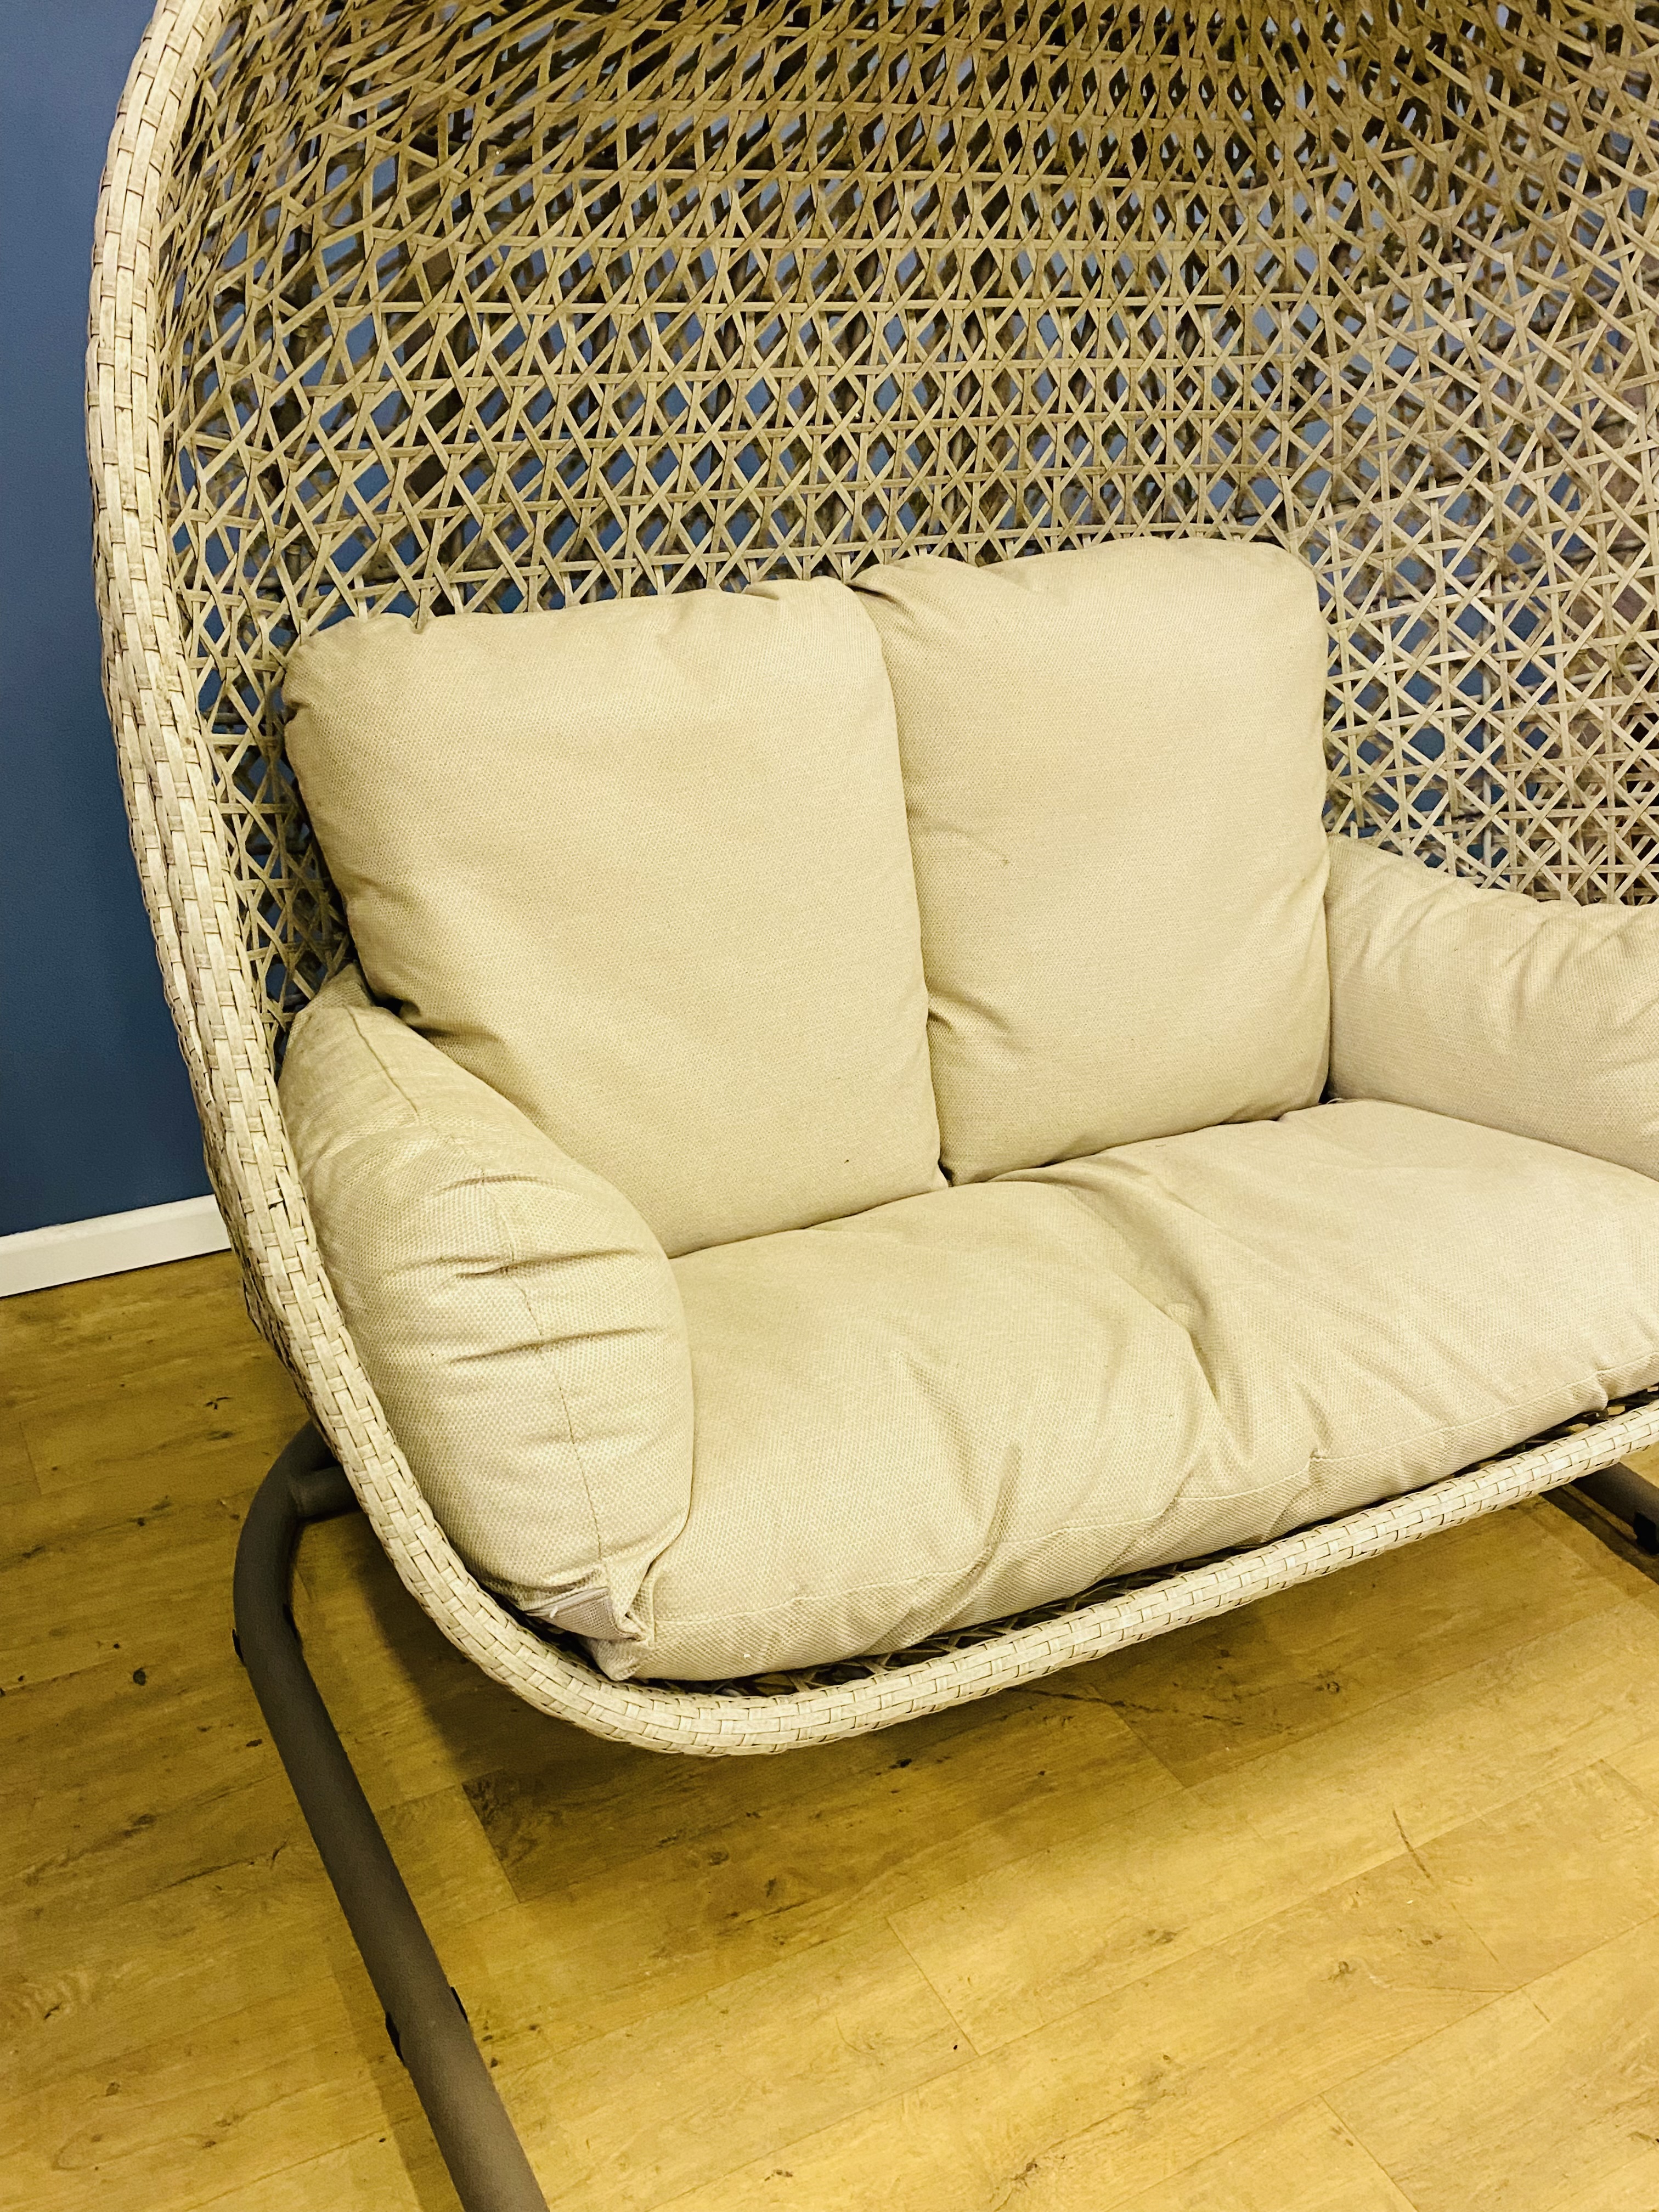 Faux rattan double egg style hanging chair - Image 4 of 6